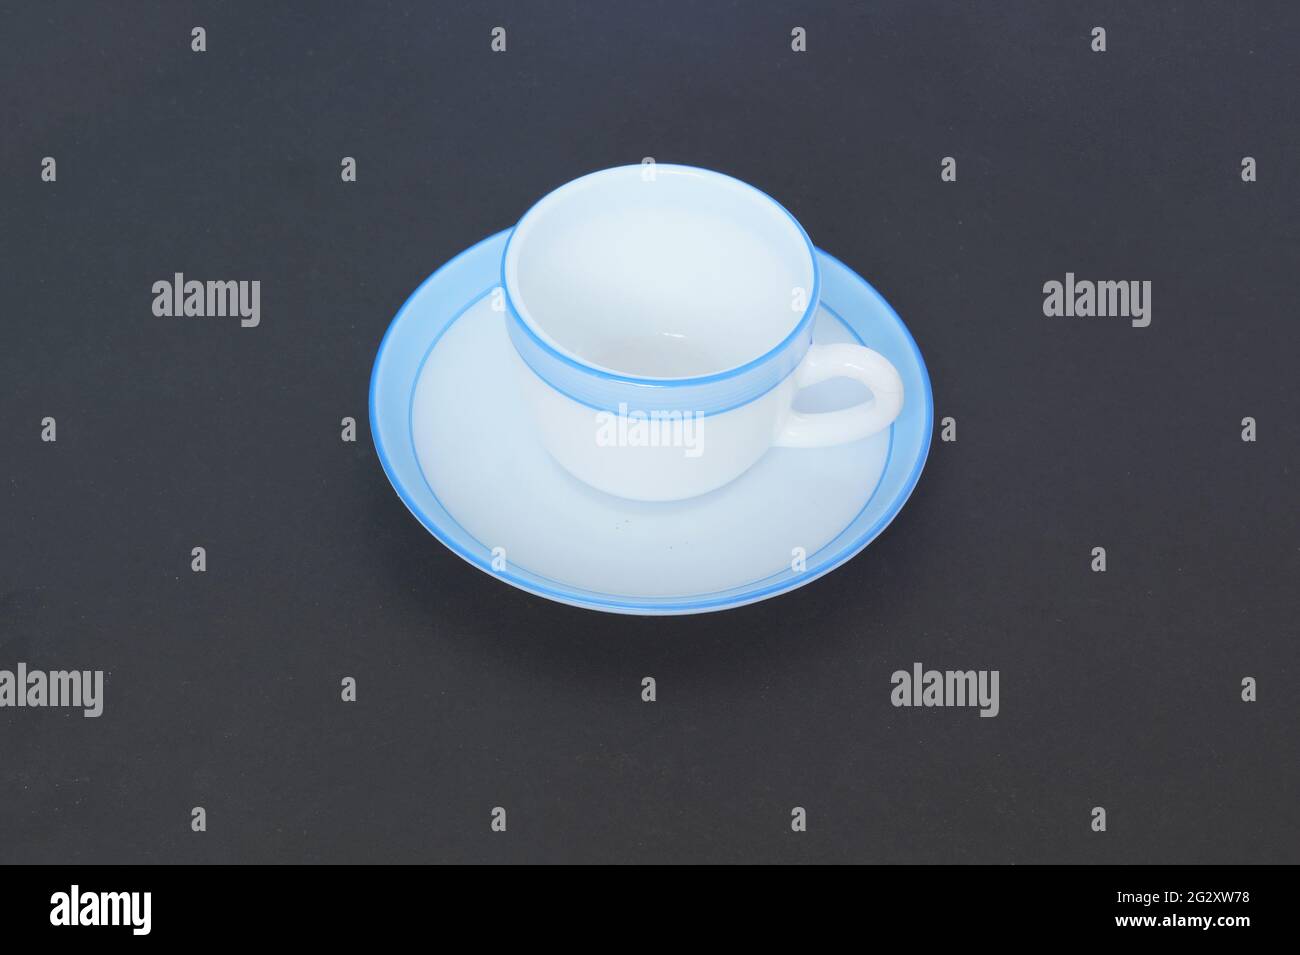 Cup and saucer in a dark background Stock Photo